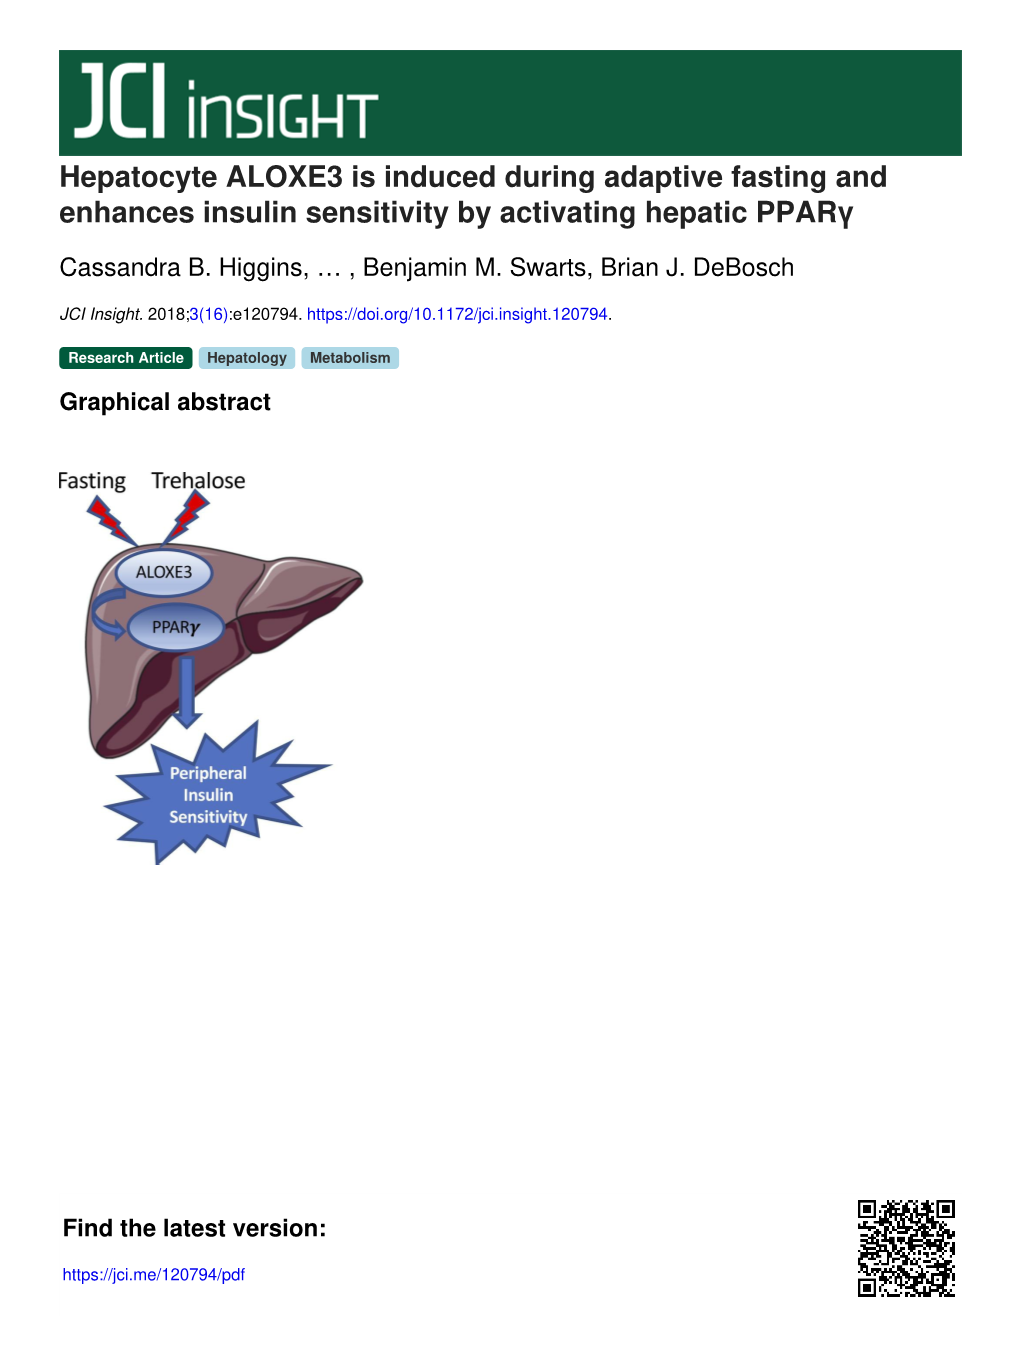 Hepatocyte ALOXE3 Is Induced During Adaptive Fasting and Enhances Insulin Sensitivity by Activating Hepatic Pparγ